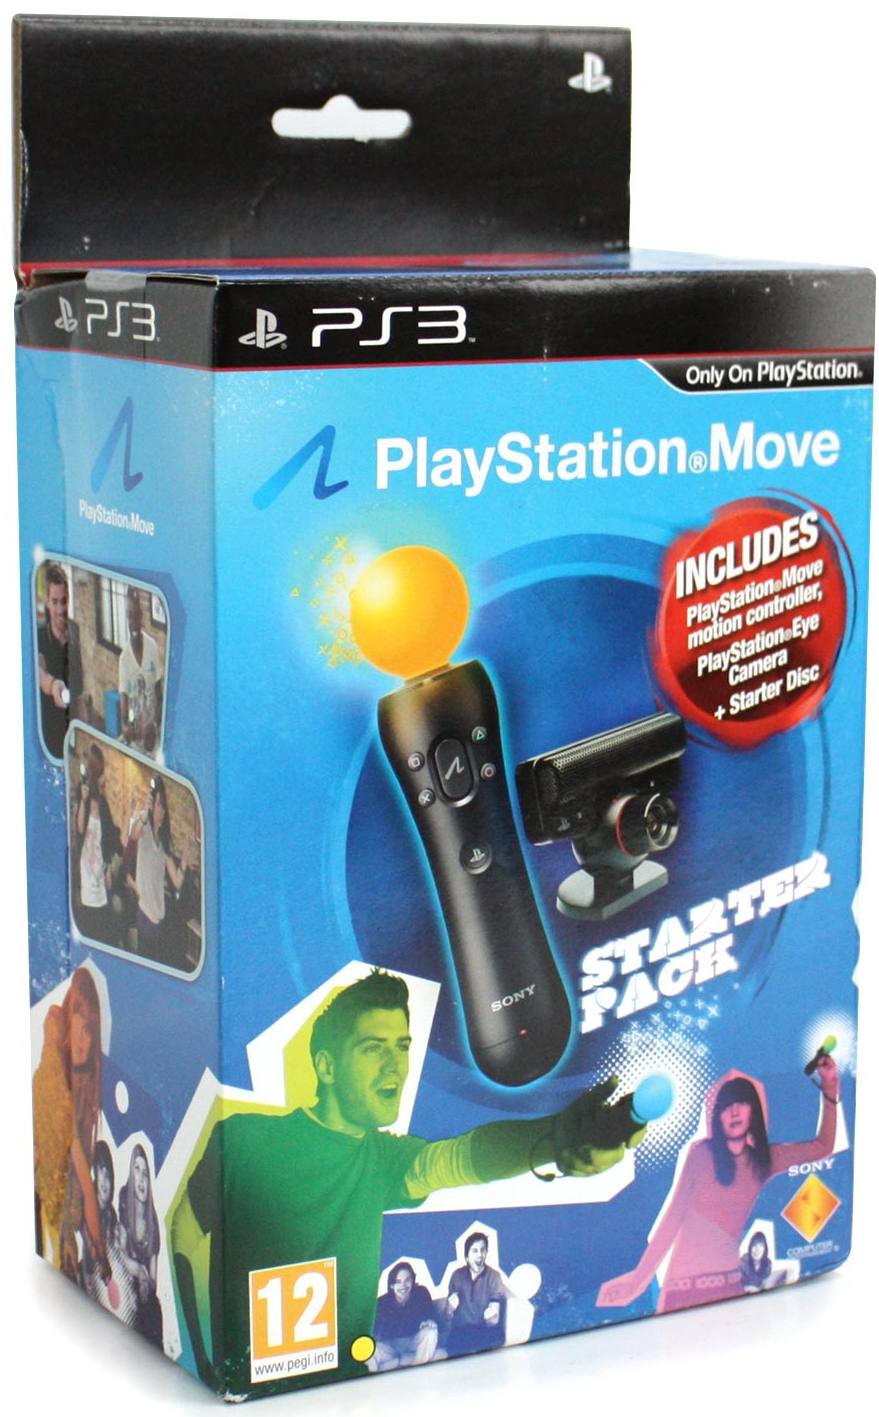 Move Starter Pack Controller with Starter Disc) for PlayStation 3